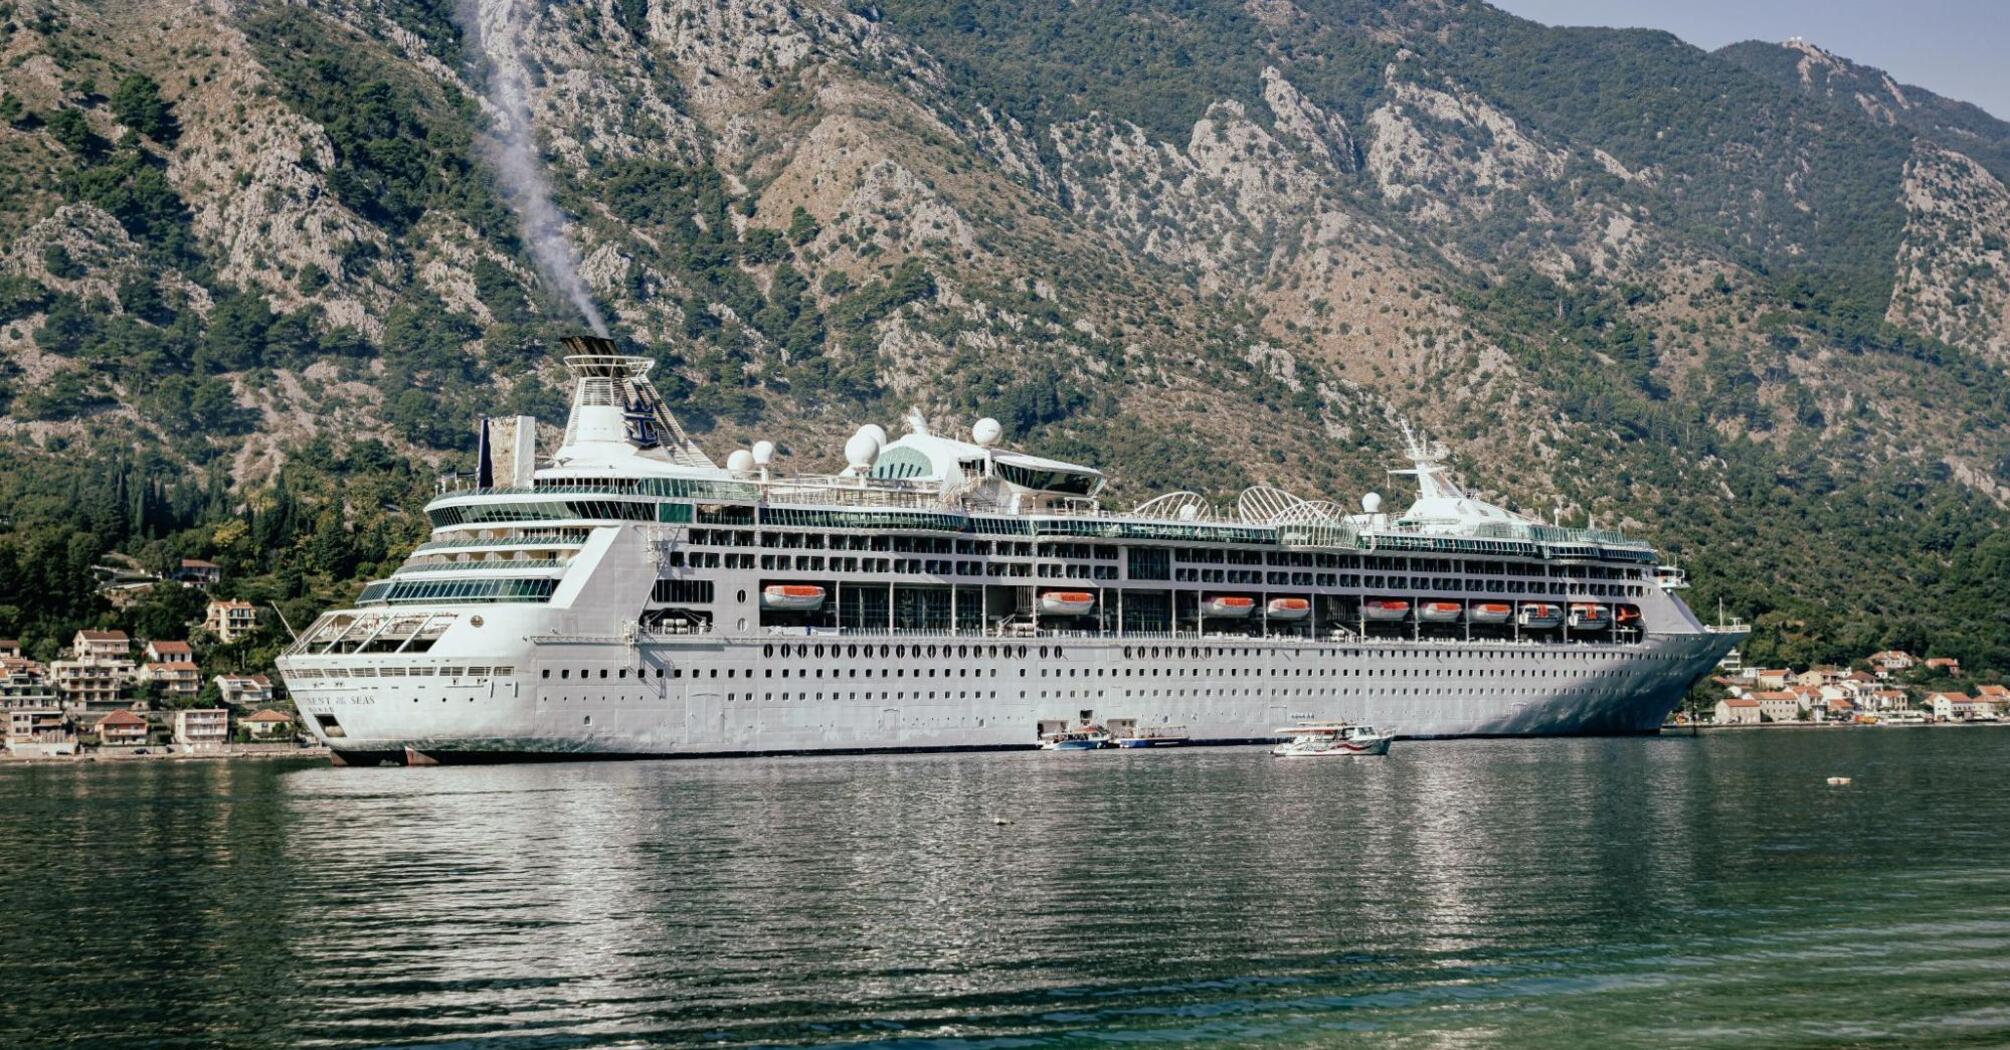 Beautiful cruise ship surrounded by mountains